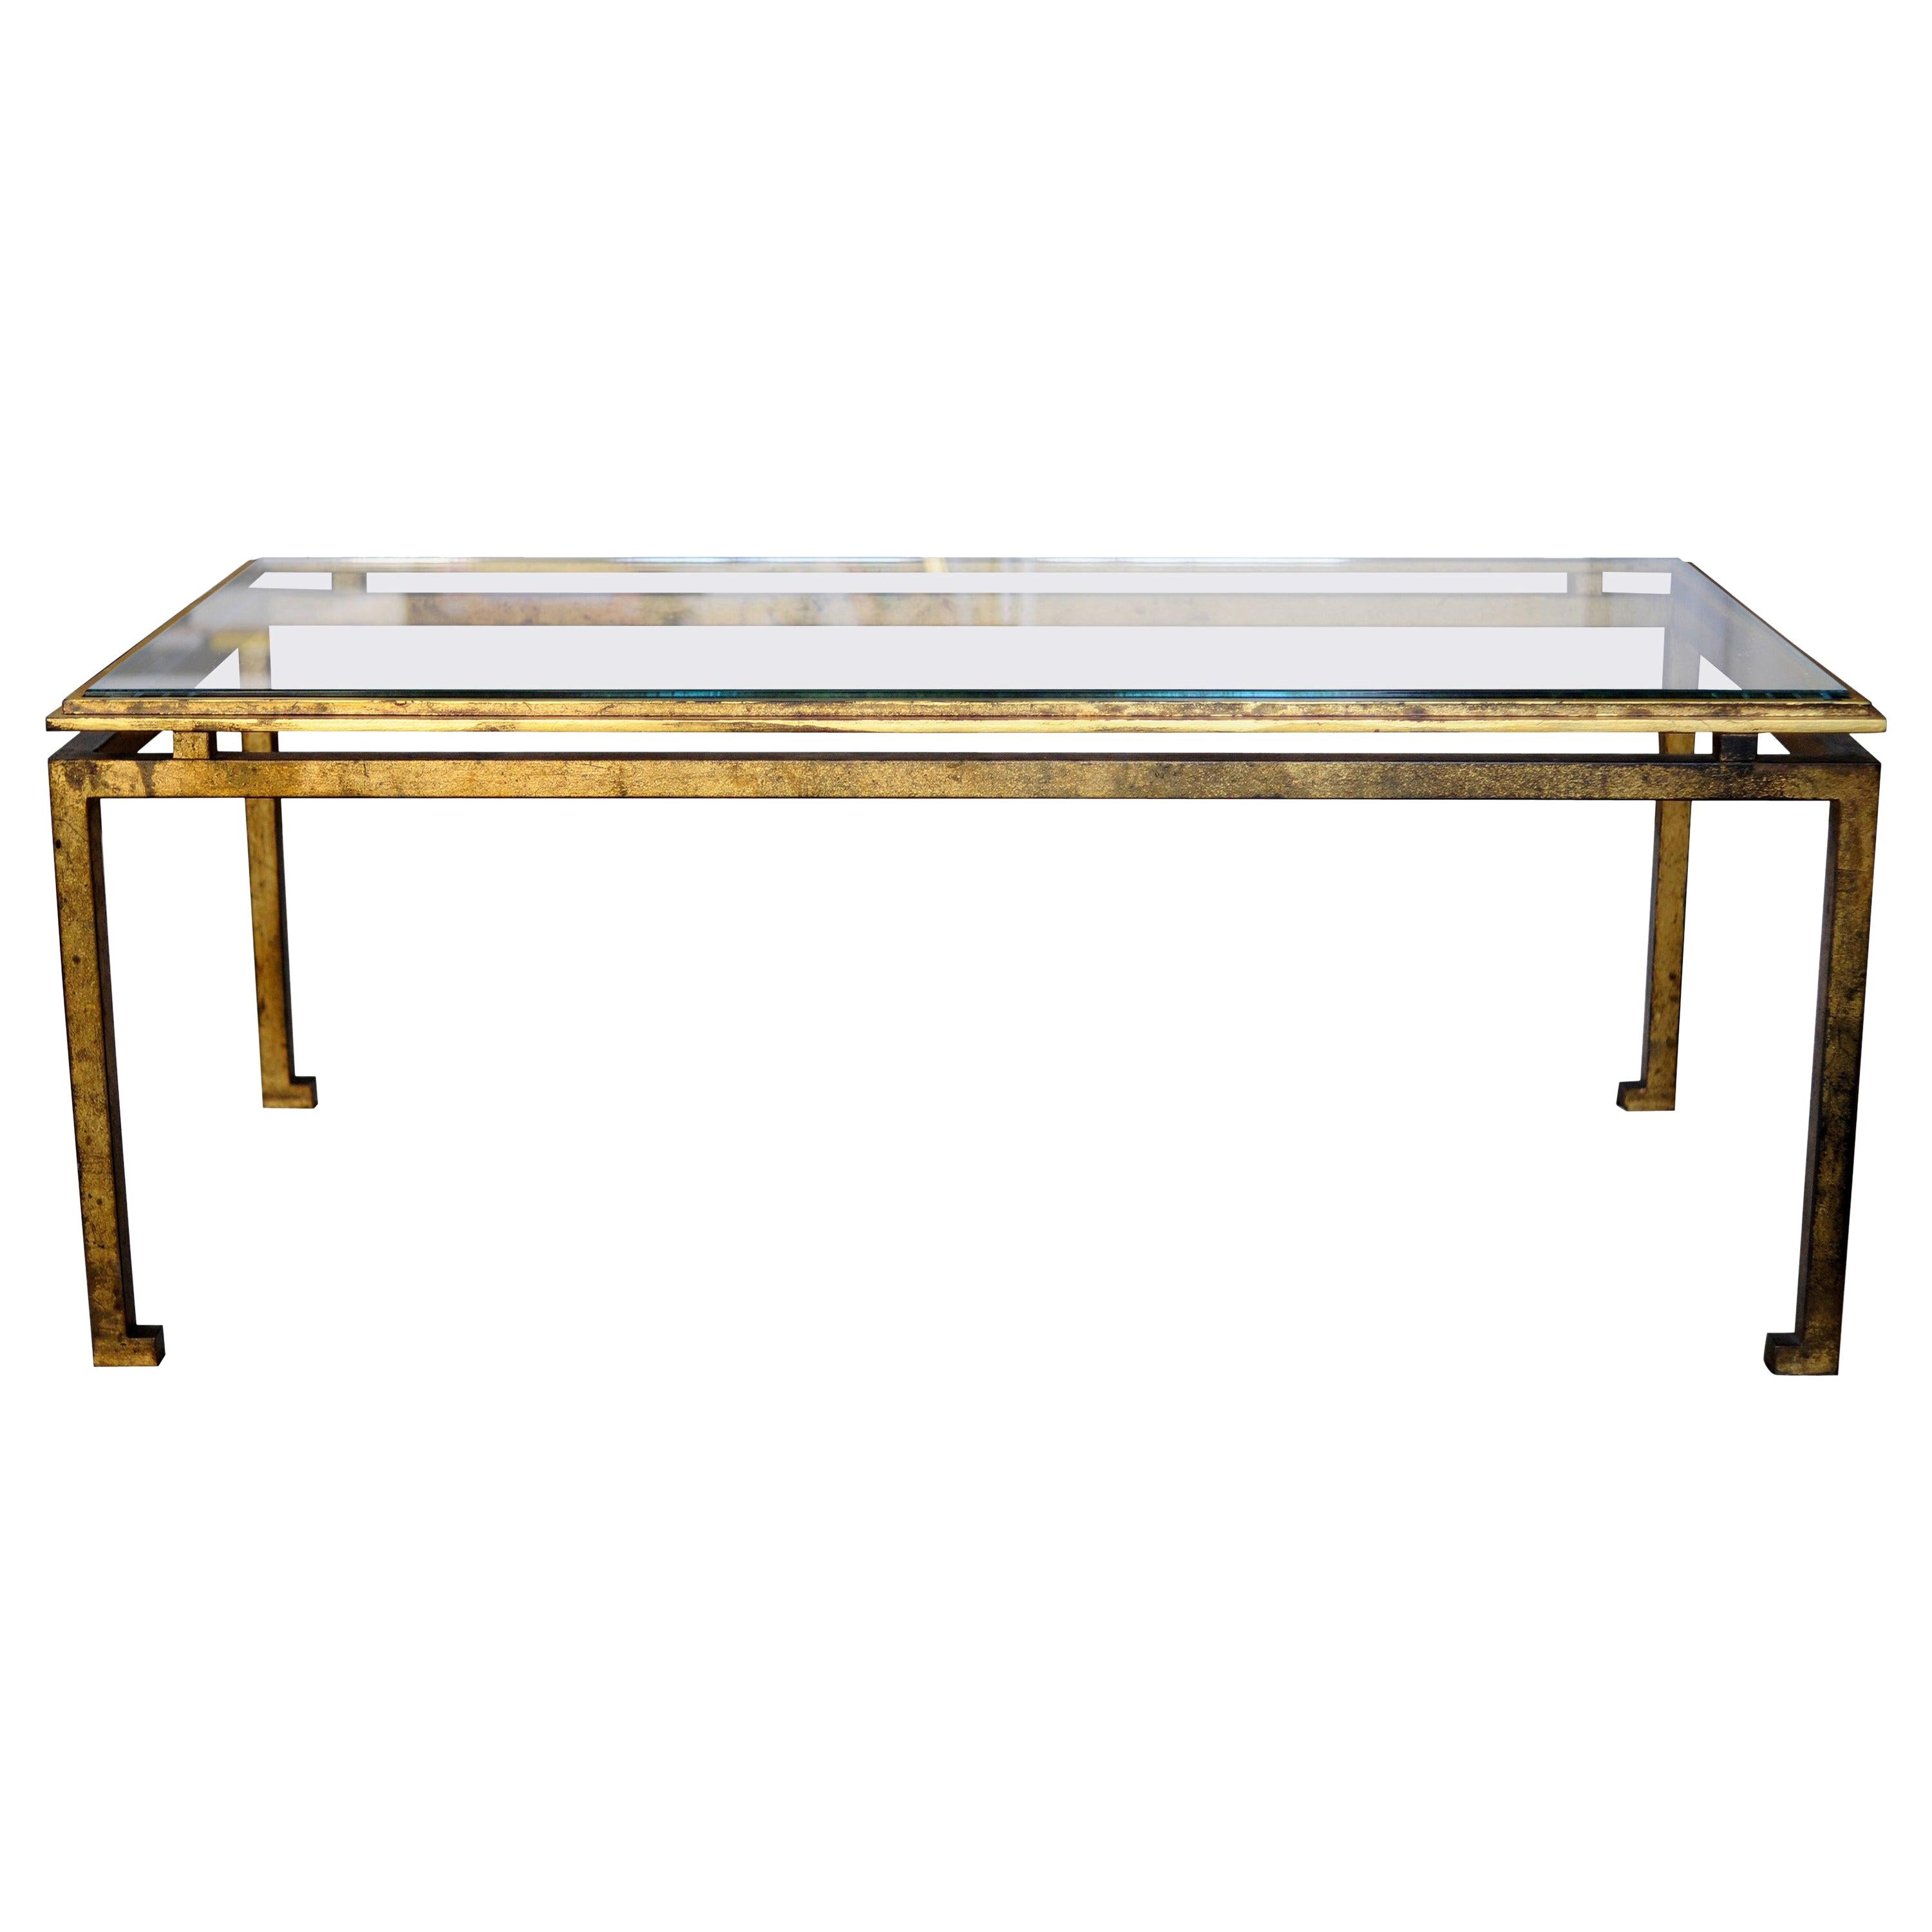 French Mid-Century Modern Neoclassical, Gilt Iron Coffee Table by Maison Ramsay For Sale